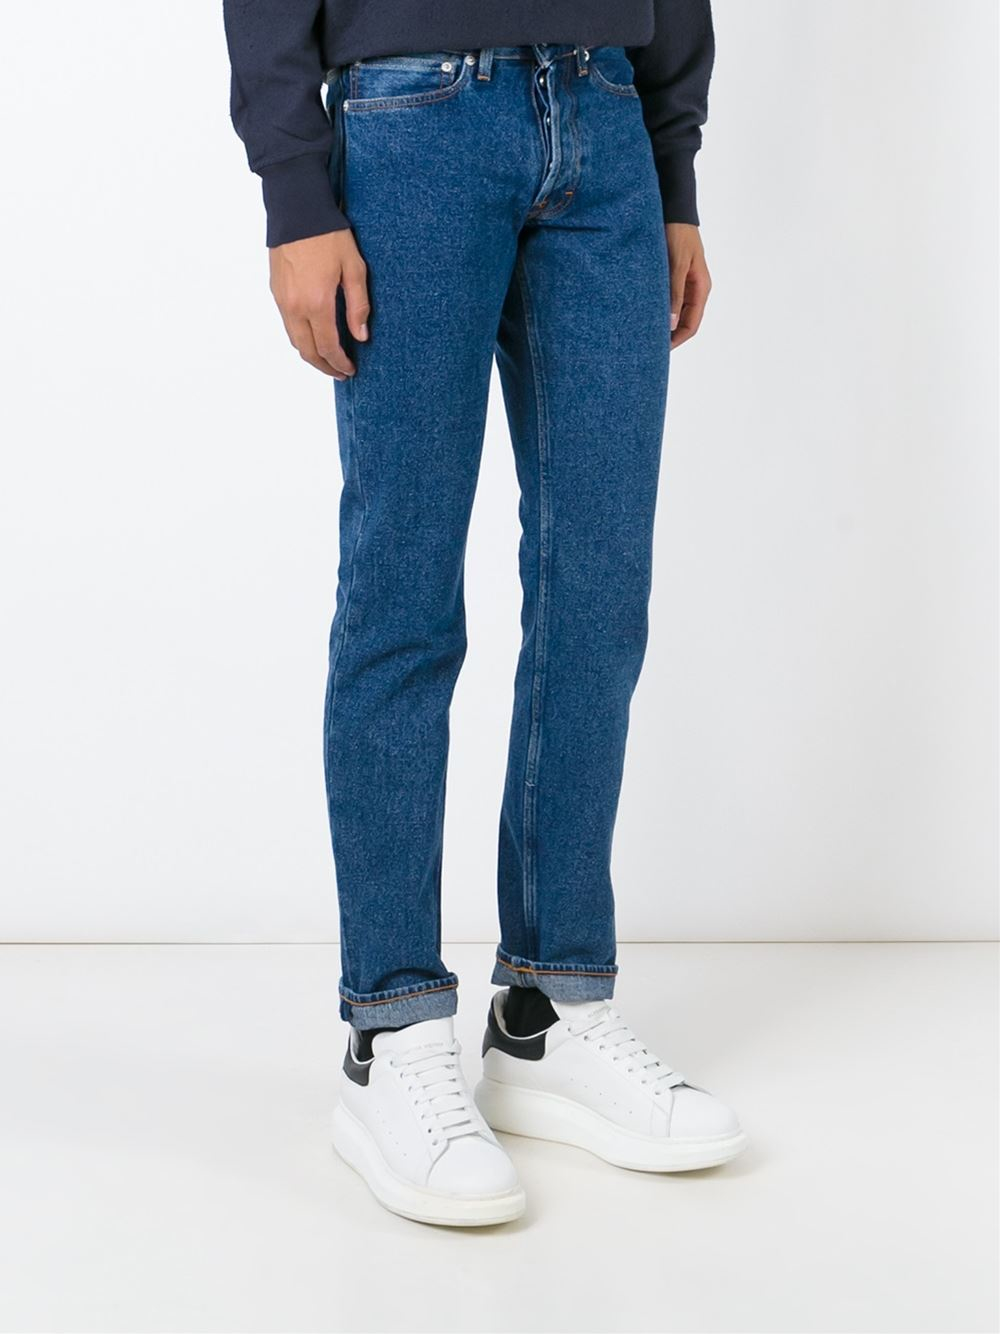 Lyst - Our Legacy 'first Cut' Stonewashed Jeans in Blue for Men